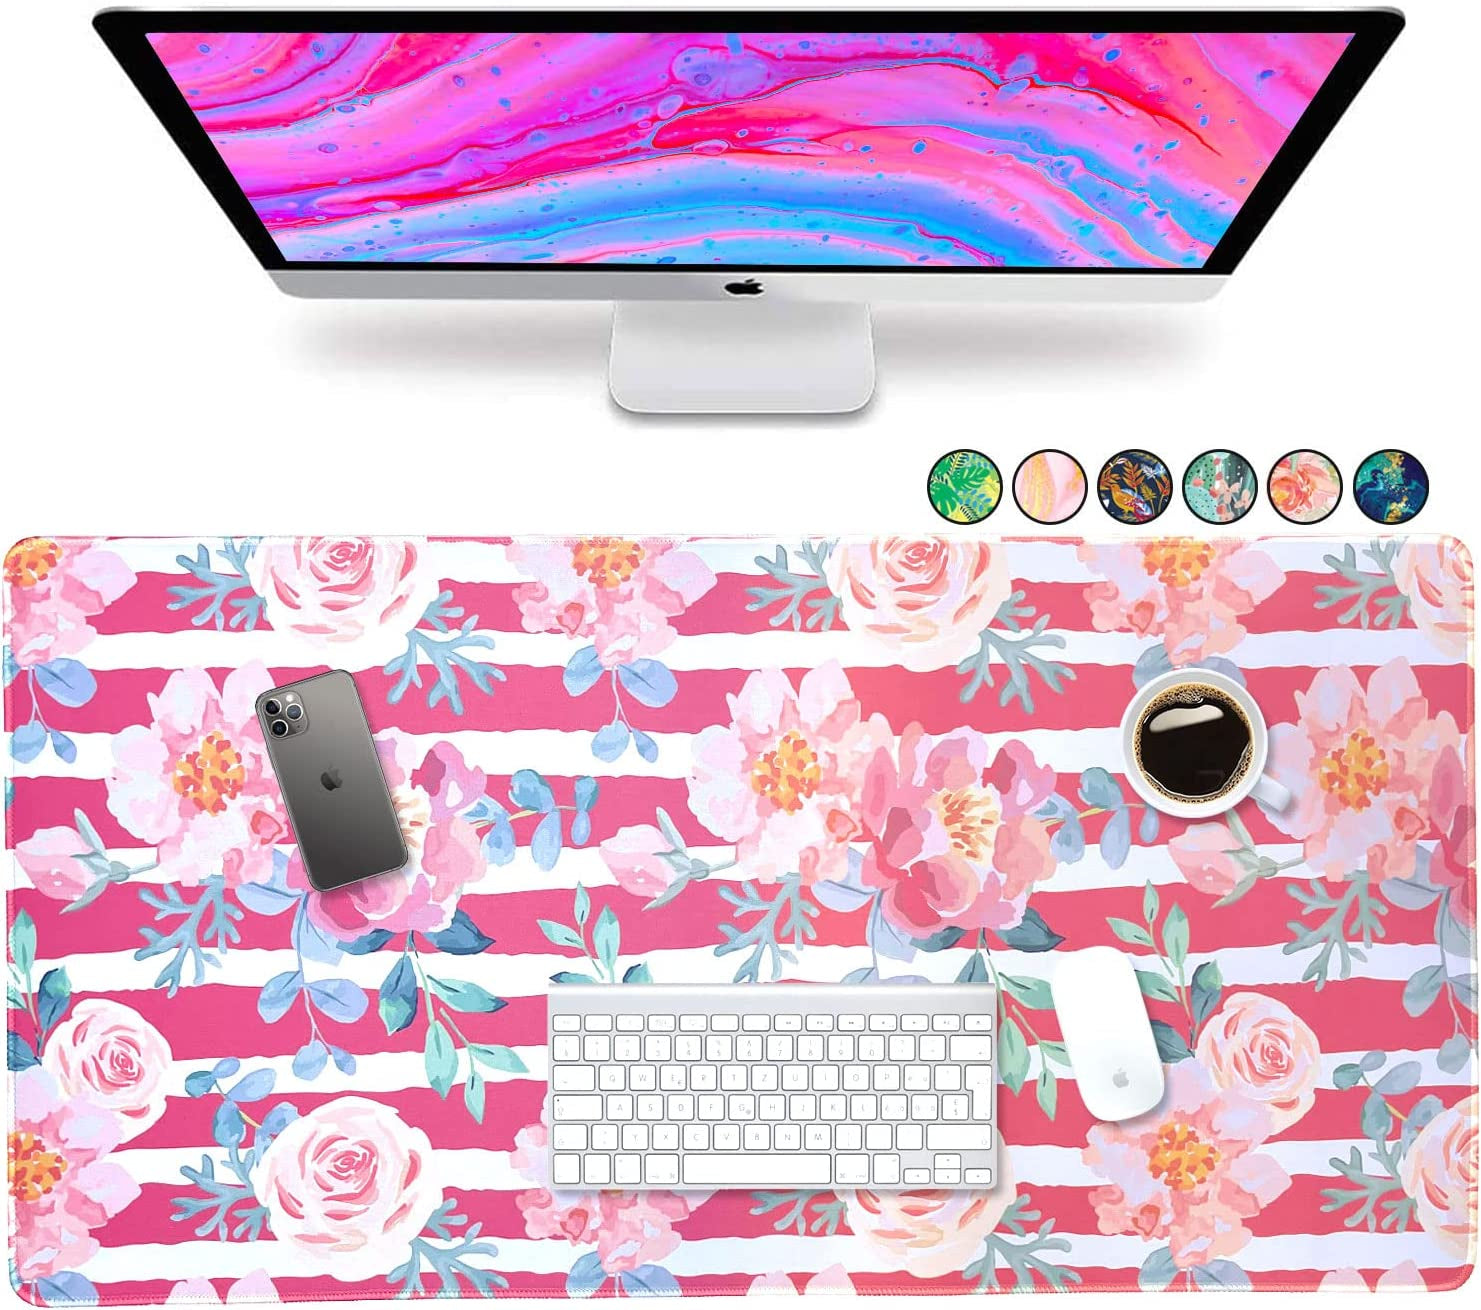 Large Mouse Pad Desk Mat Keyboard Desktop Home Office School Essentials College Cute Decor Big Laptop Protector Computer Accessories Pretty Mousepad Floral Pink Roses White Stripe 30"X15"